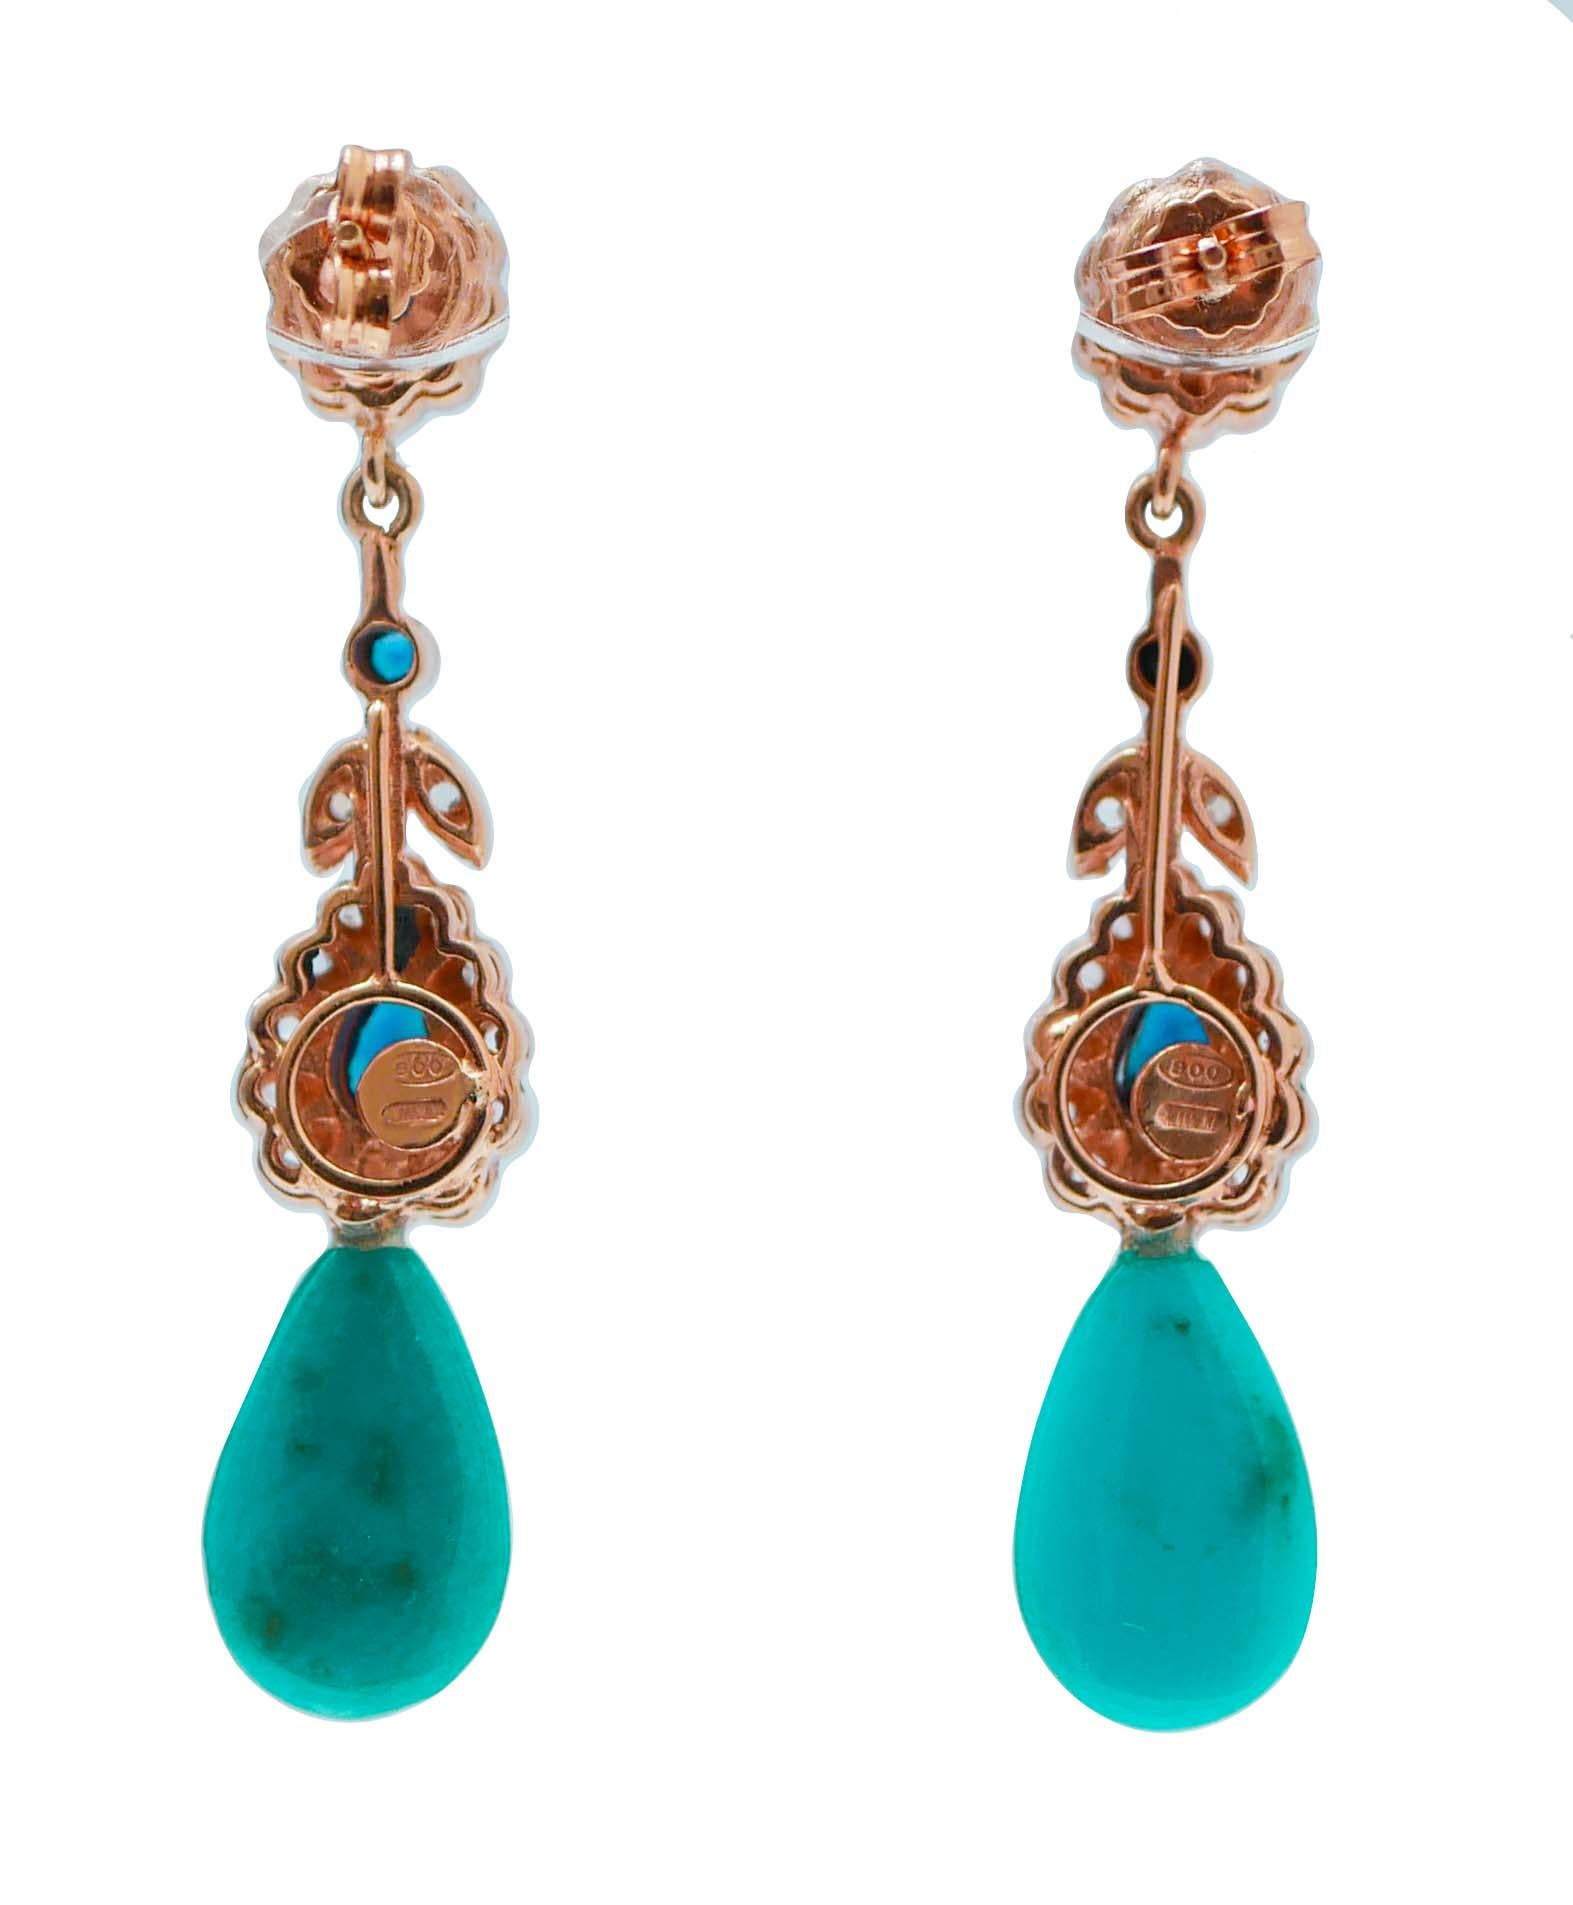 Retro Turquoise, Sapphires, Diamonds, Rose Gold and Silver Dangle Earrings.